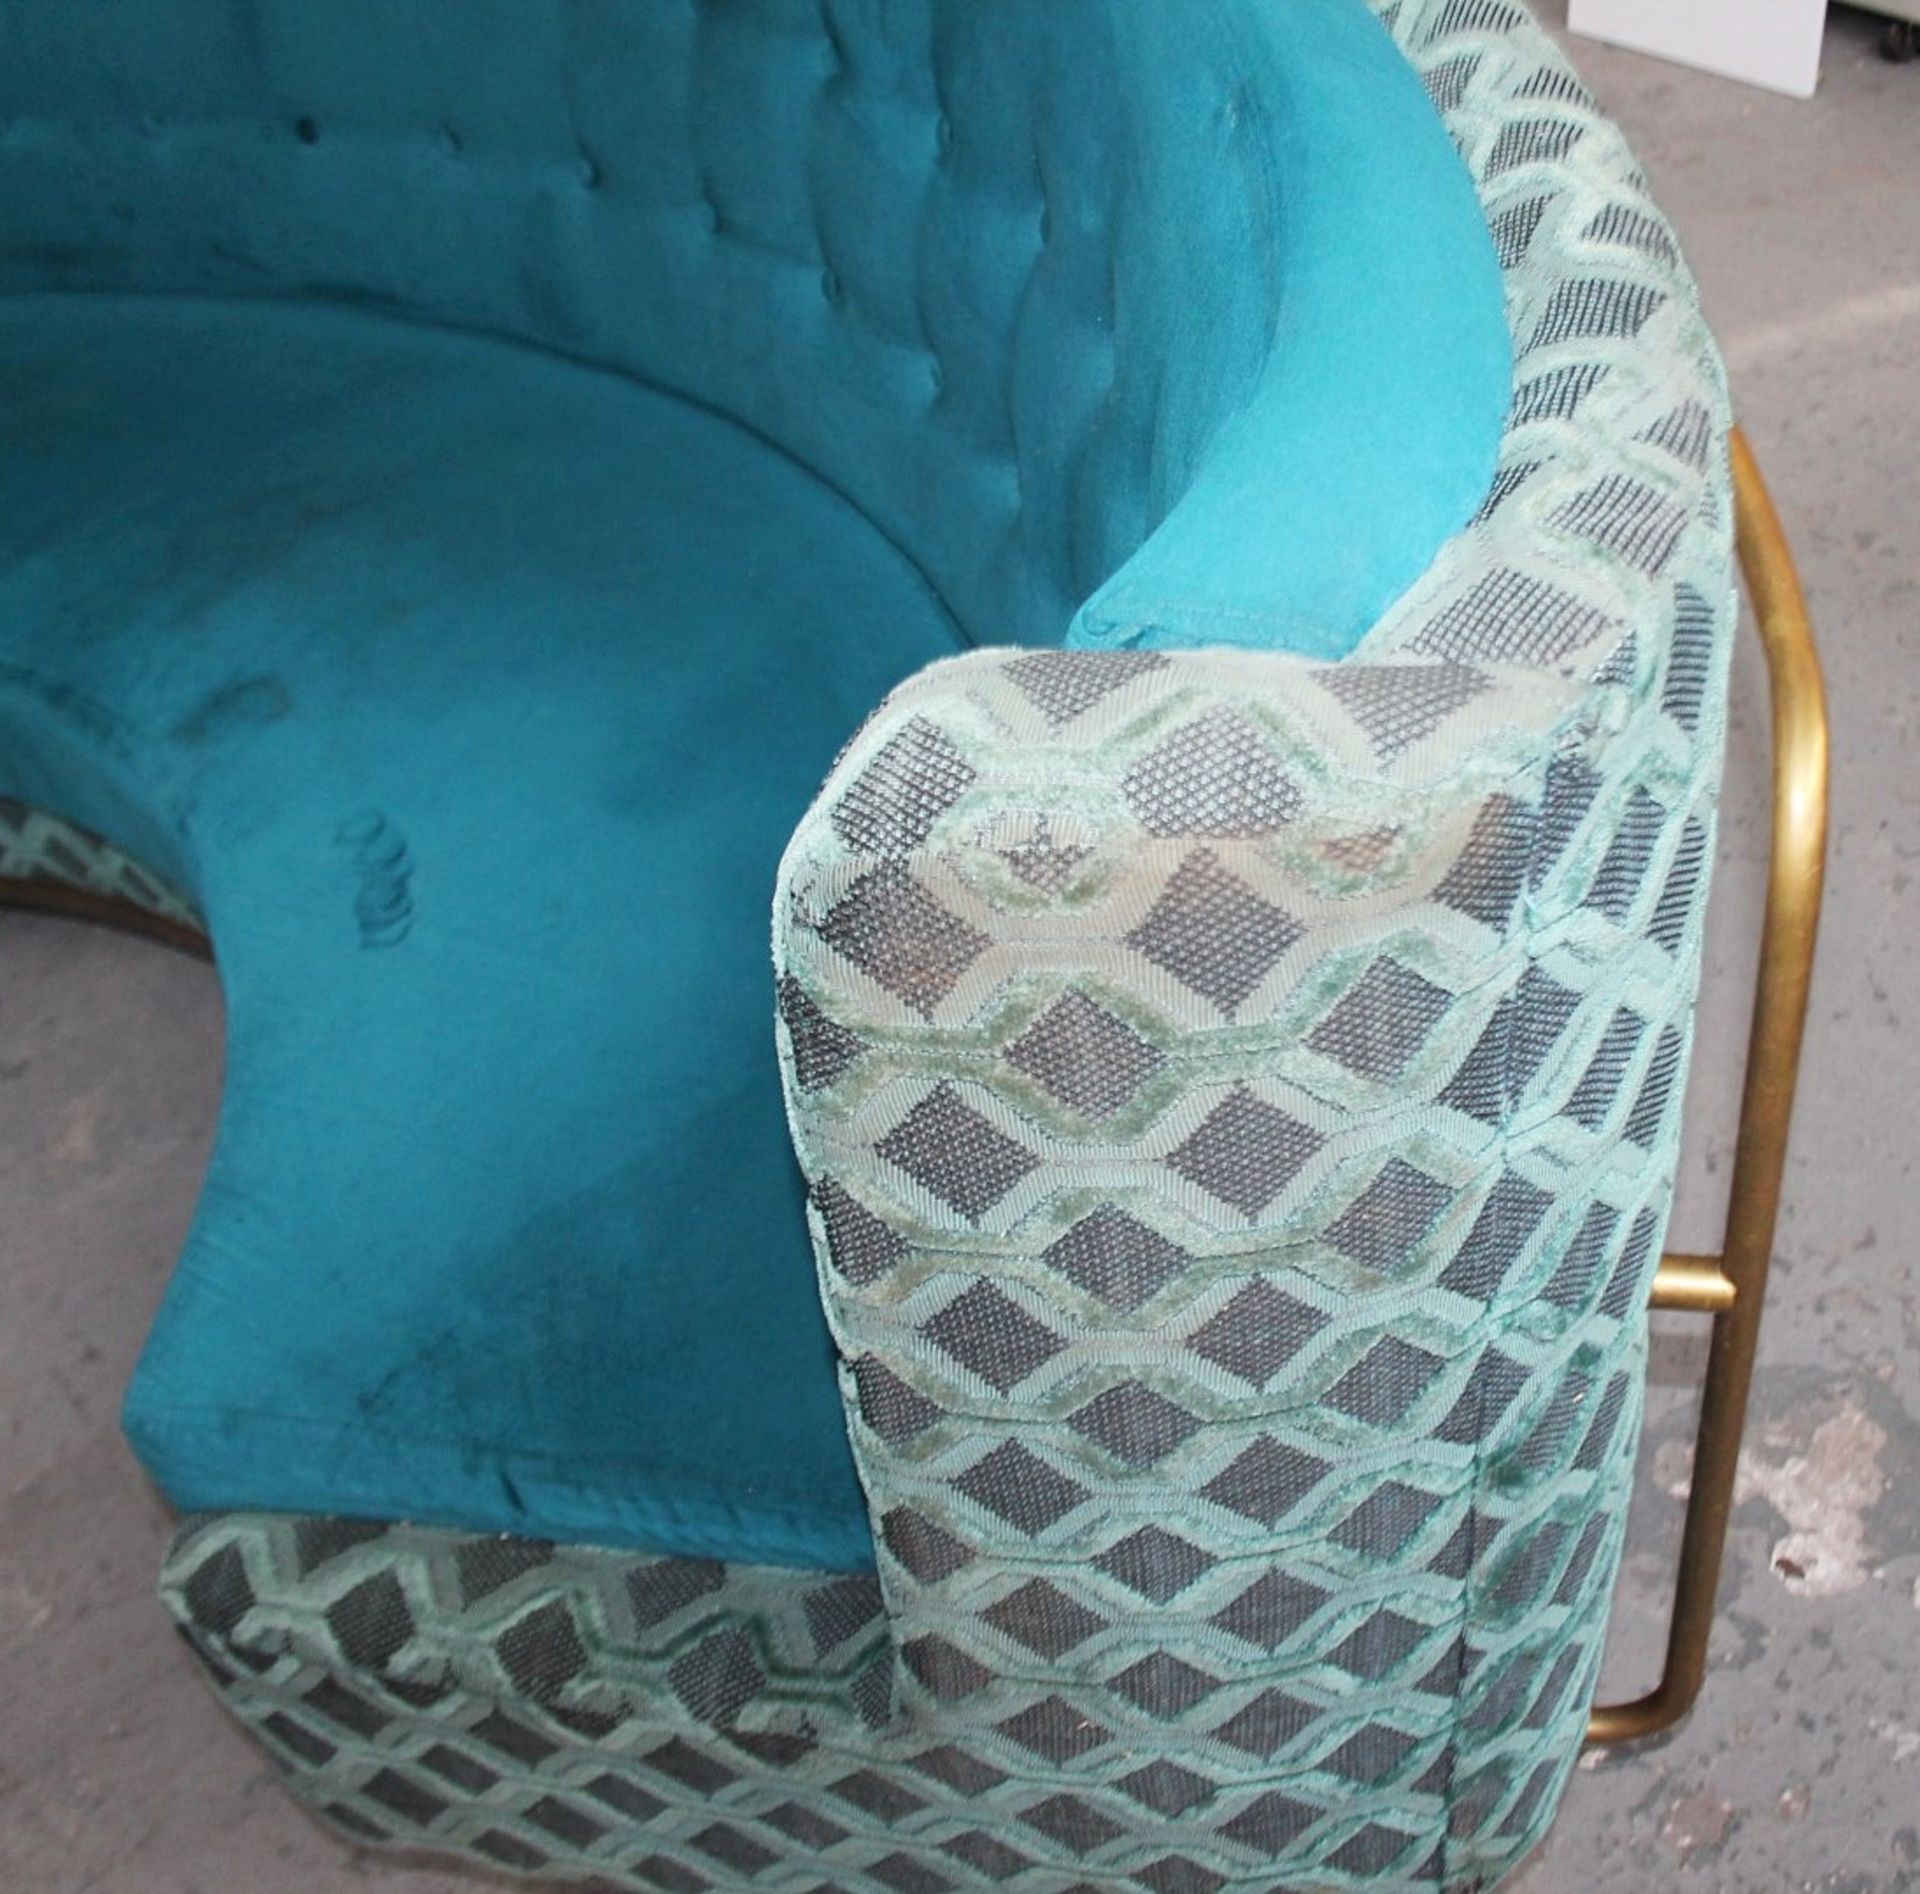 1 x Bespoke Commercial Curved C-Shaped Booth Seating Upholstered In Premium Teal Coloured Fabrics - - Image 13 of 17